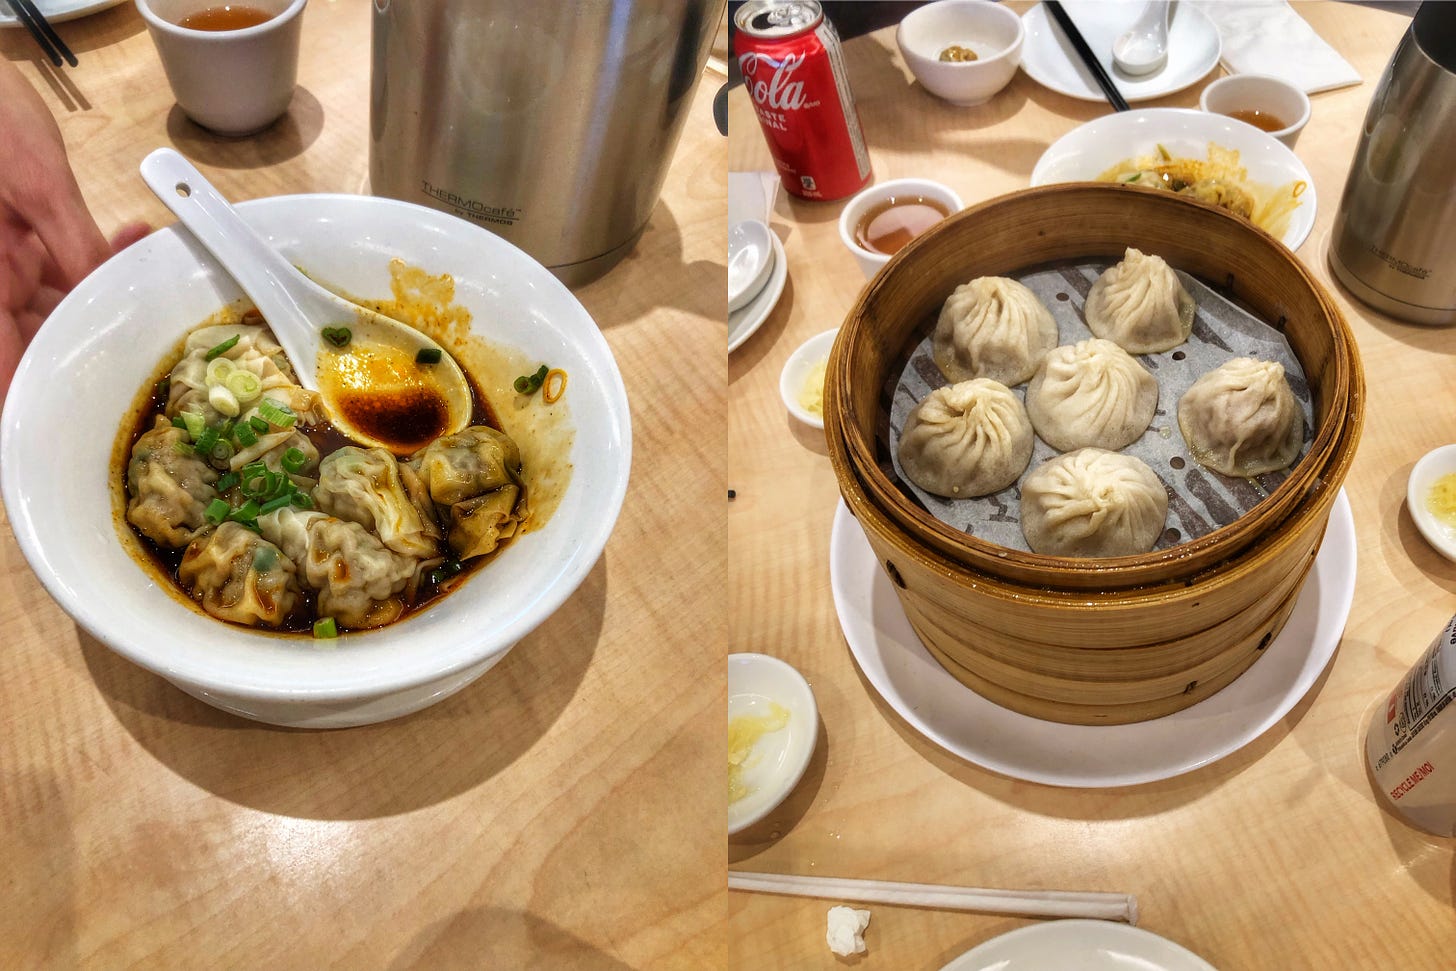 Two photos taken at Ding Tai Fung. The first shows a bowl of Shanghai wontons is spicy sauce. The second shows a bamboo steeamer containing soup dumplings.